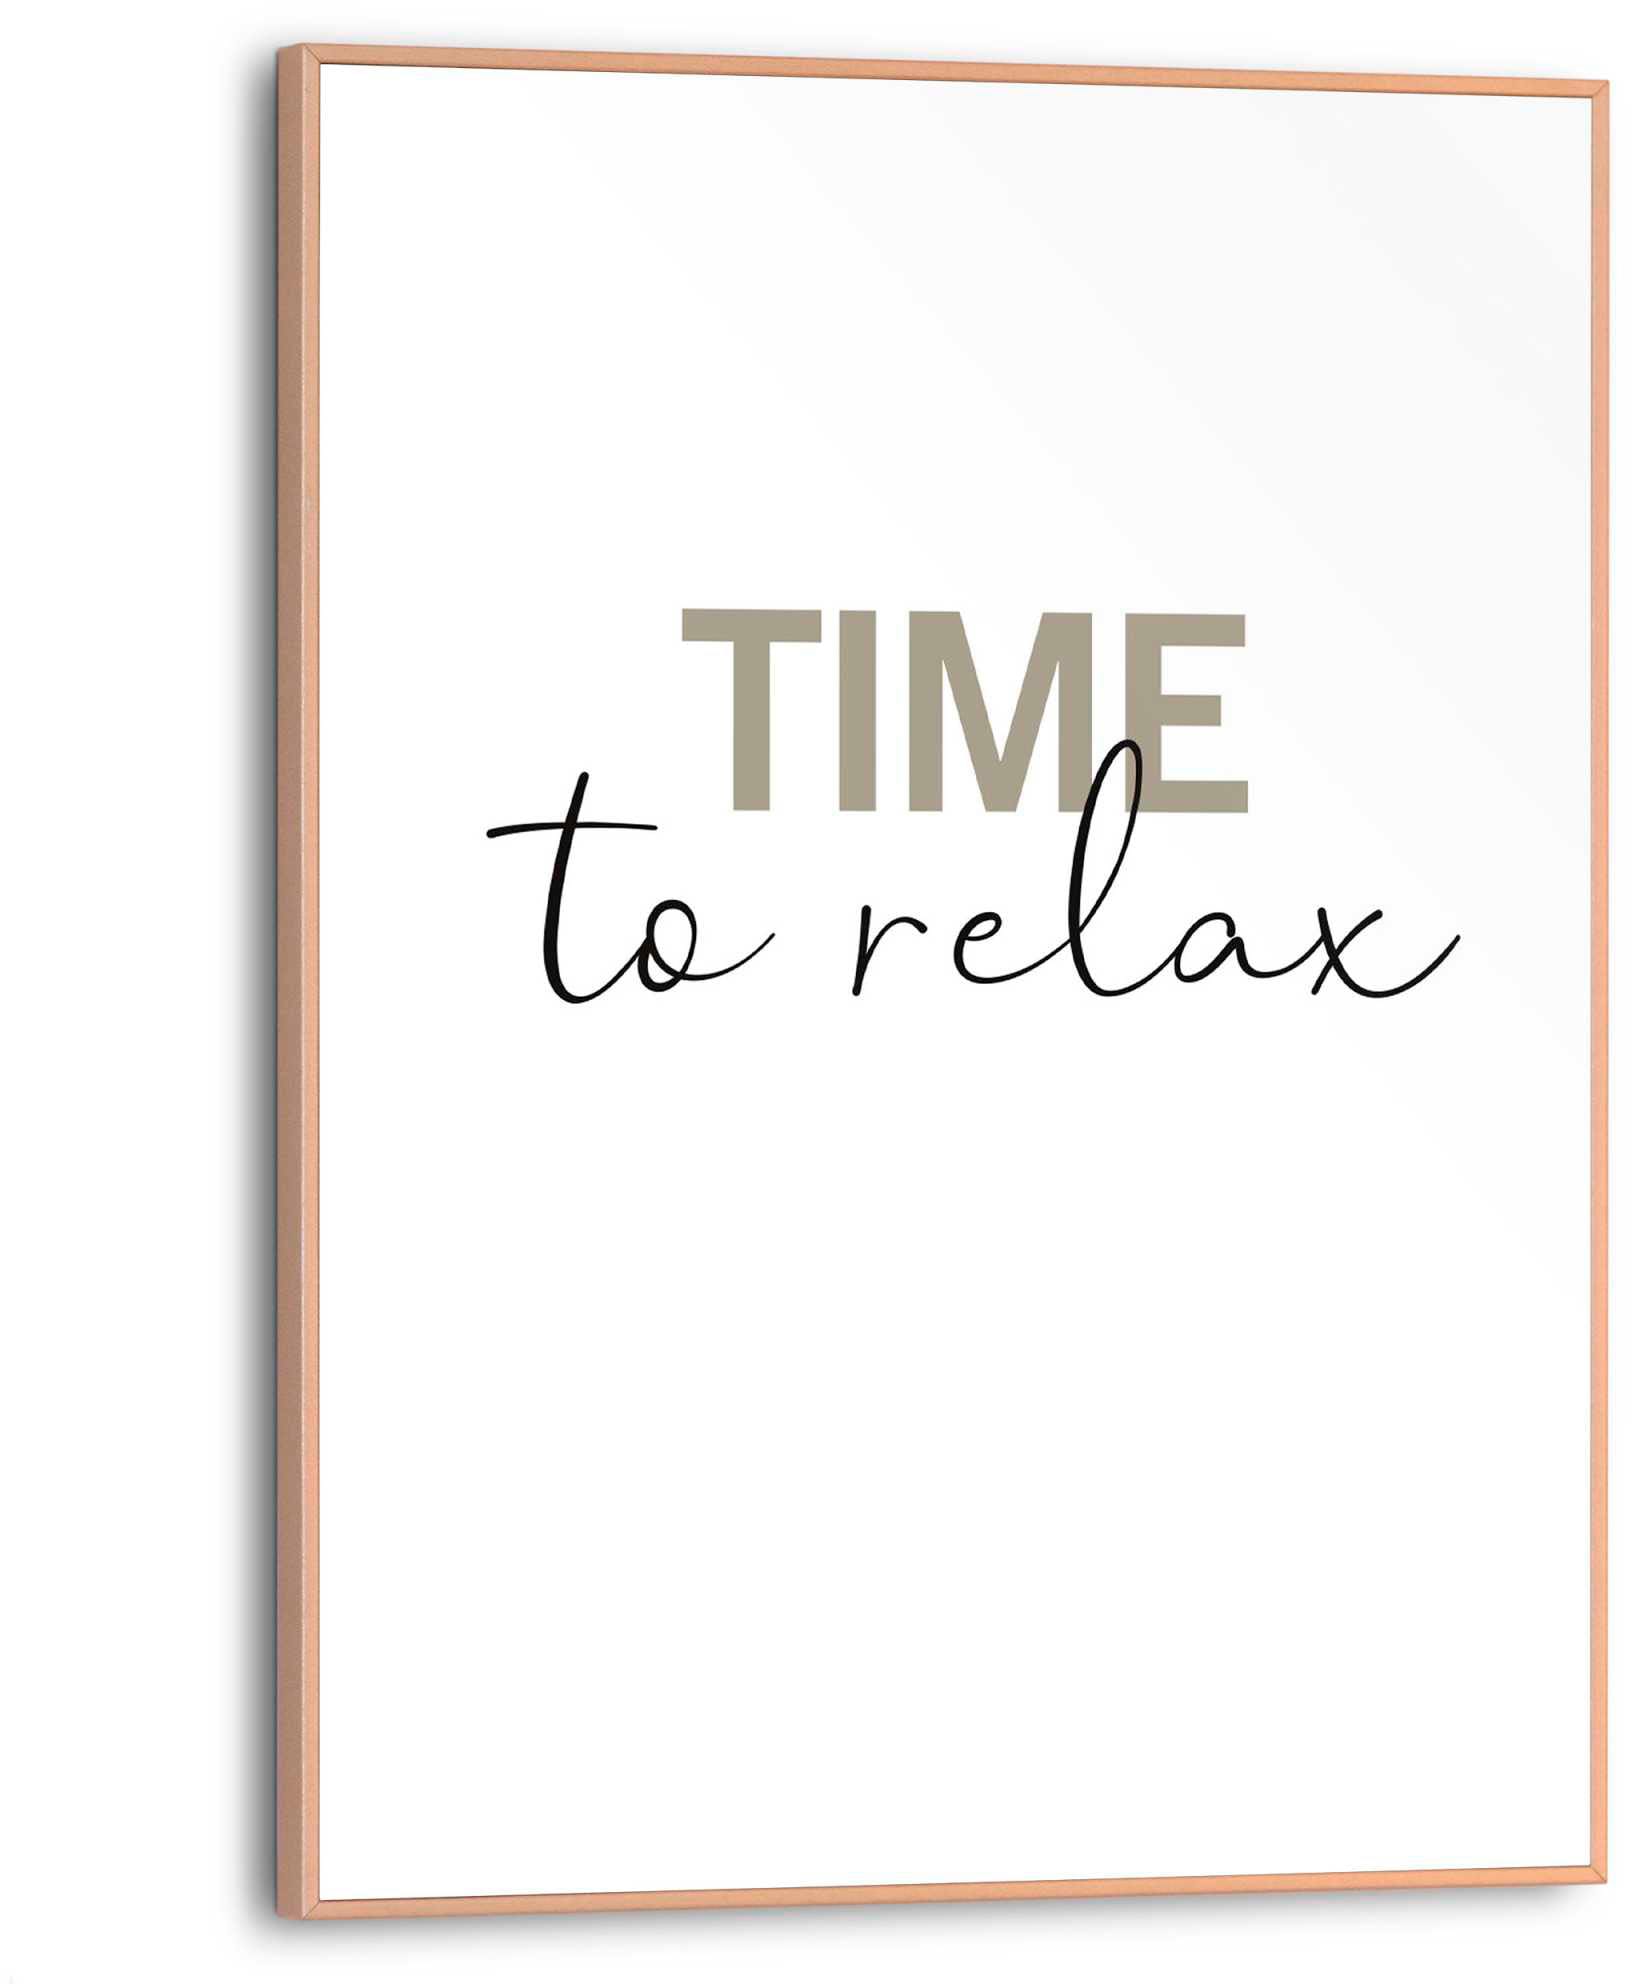 Poster to OTTO relax« bei Reinders! kaufen »Time